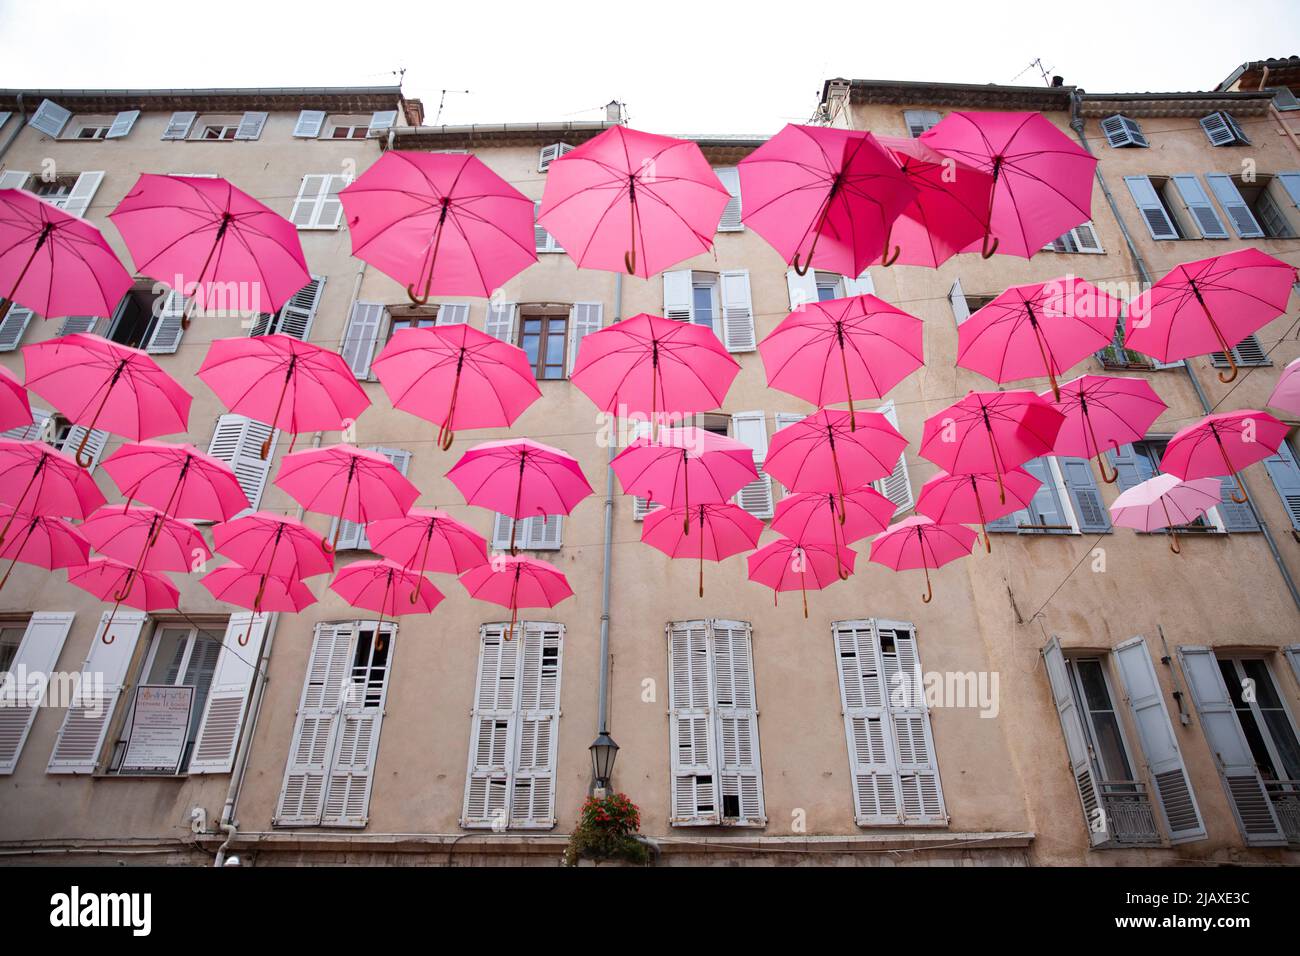 Historic Center of Grasse, France on September 9, 2021. The historic center of Grasse was once home to perfume factories that have since moved out of the old town. Pink umbrellas are suspended above the streets every May through October, representing the Grasse May rose - an ingredient in the iconic Chanel No. 5. - which blooms only in May. Grasse has had a prospering perfume industry since the end of the 18th century and is considered the world's capital of perfume. There are numerous of old 'parfumeries' in Grasse, such as Galimard, Molinard and Fragonard, each with tours and a museum. Many Stock Photo